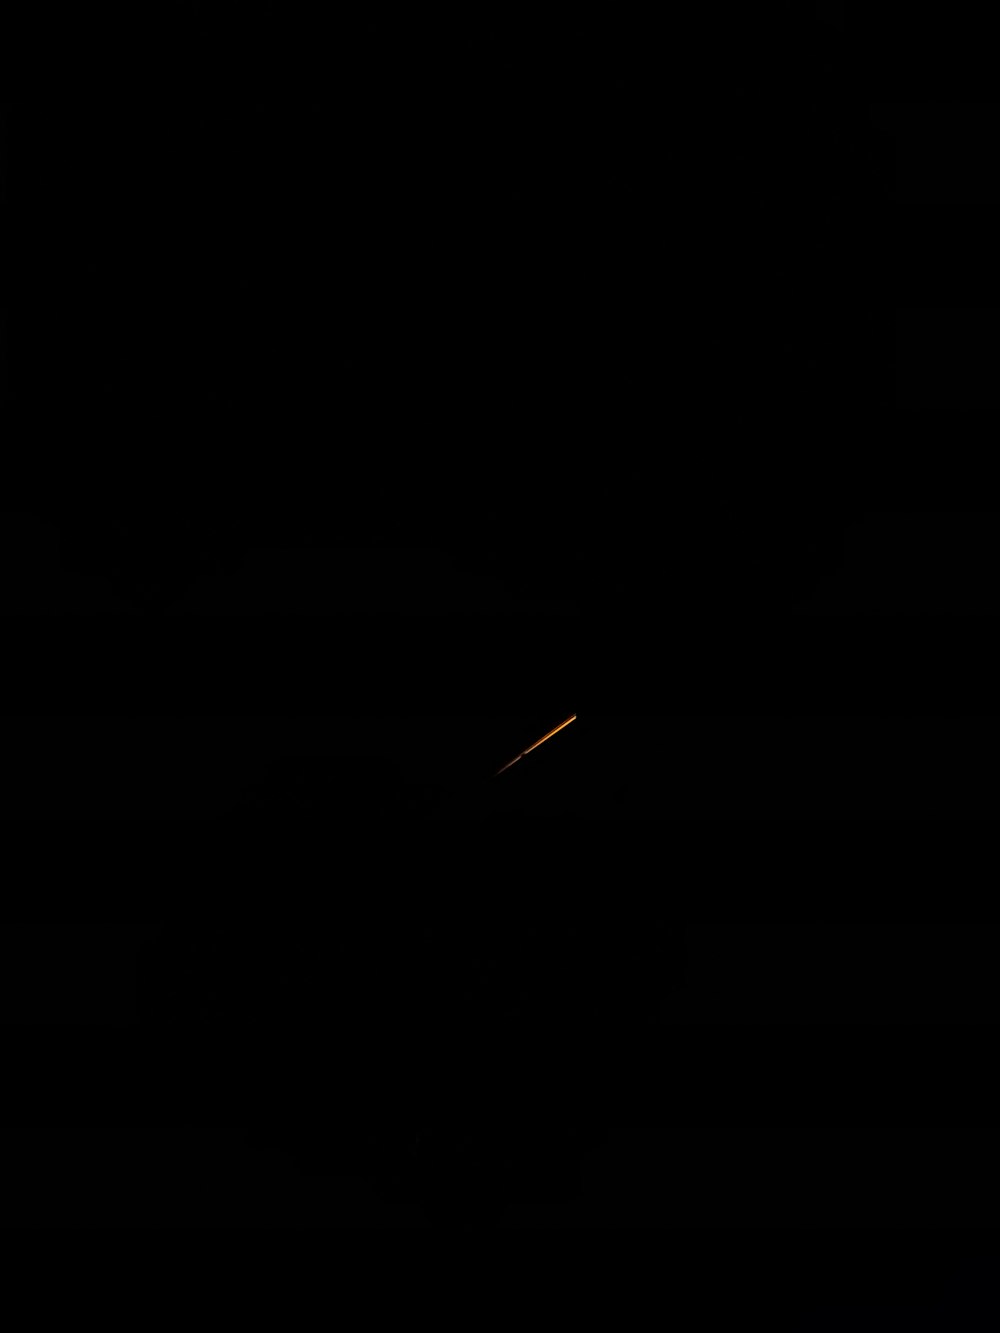 a plane is flying in the dark sky